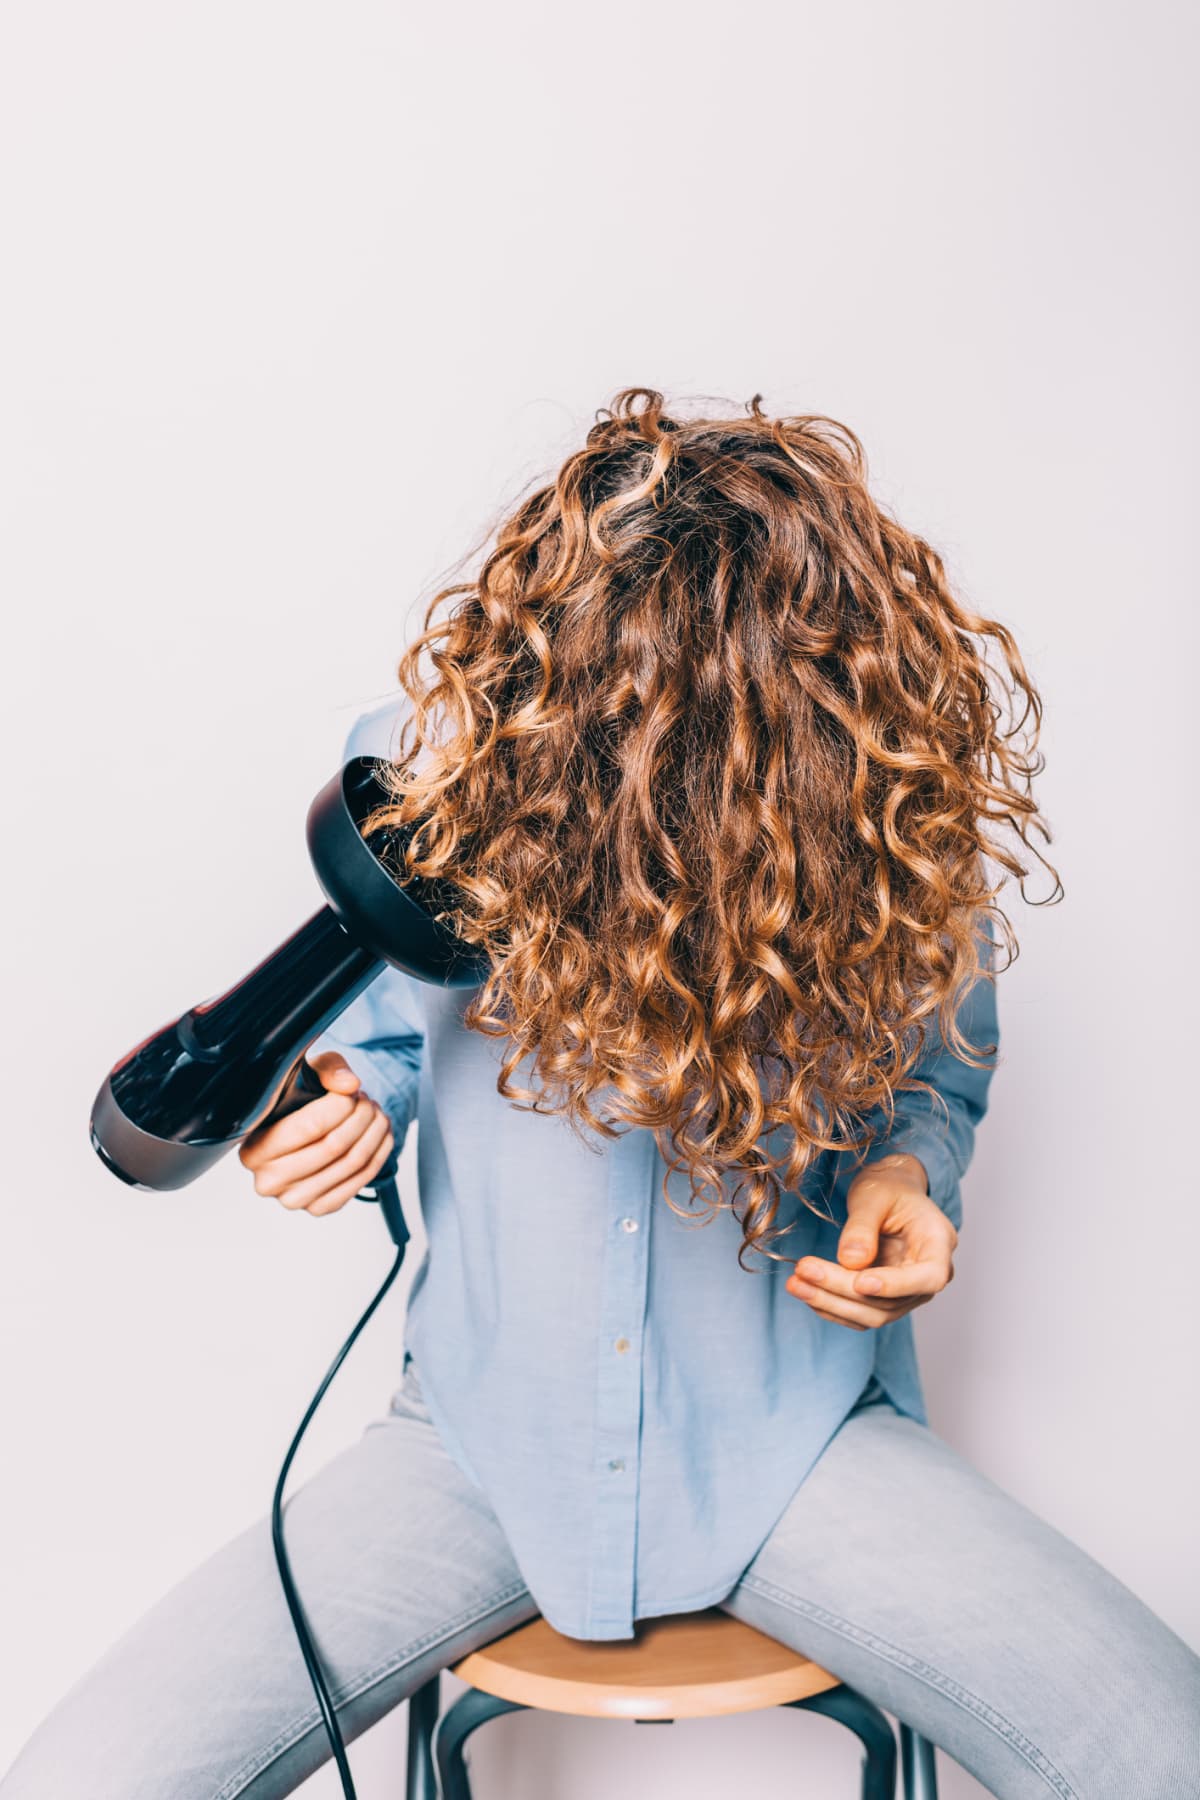 Young woman sitting on chair styling her curly hair with hairdryer with special diffuser nozzle.